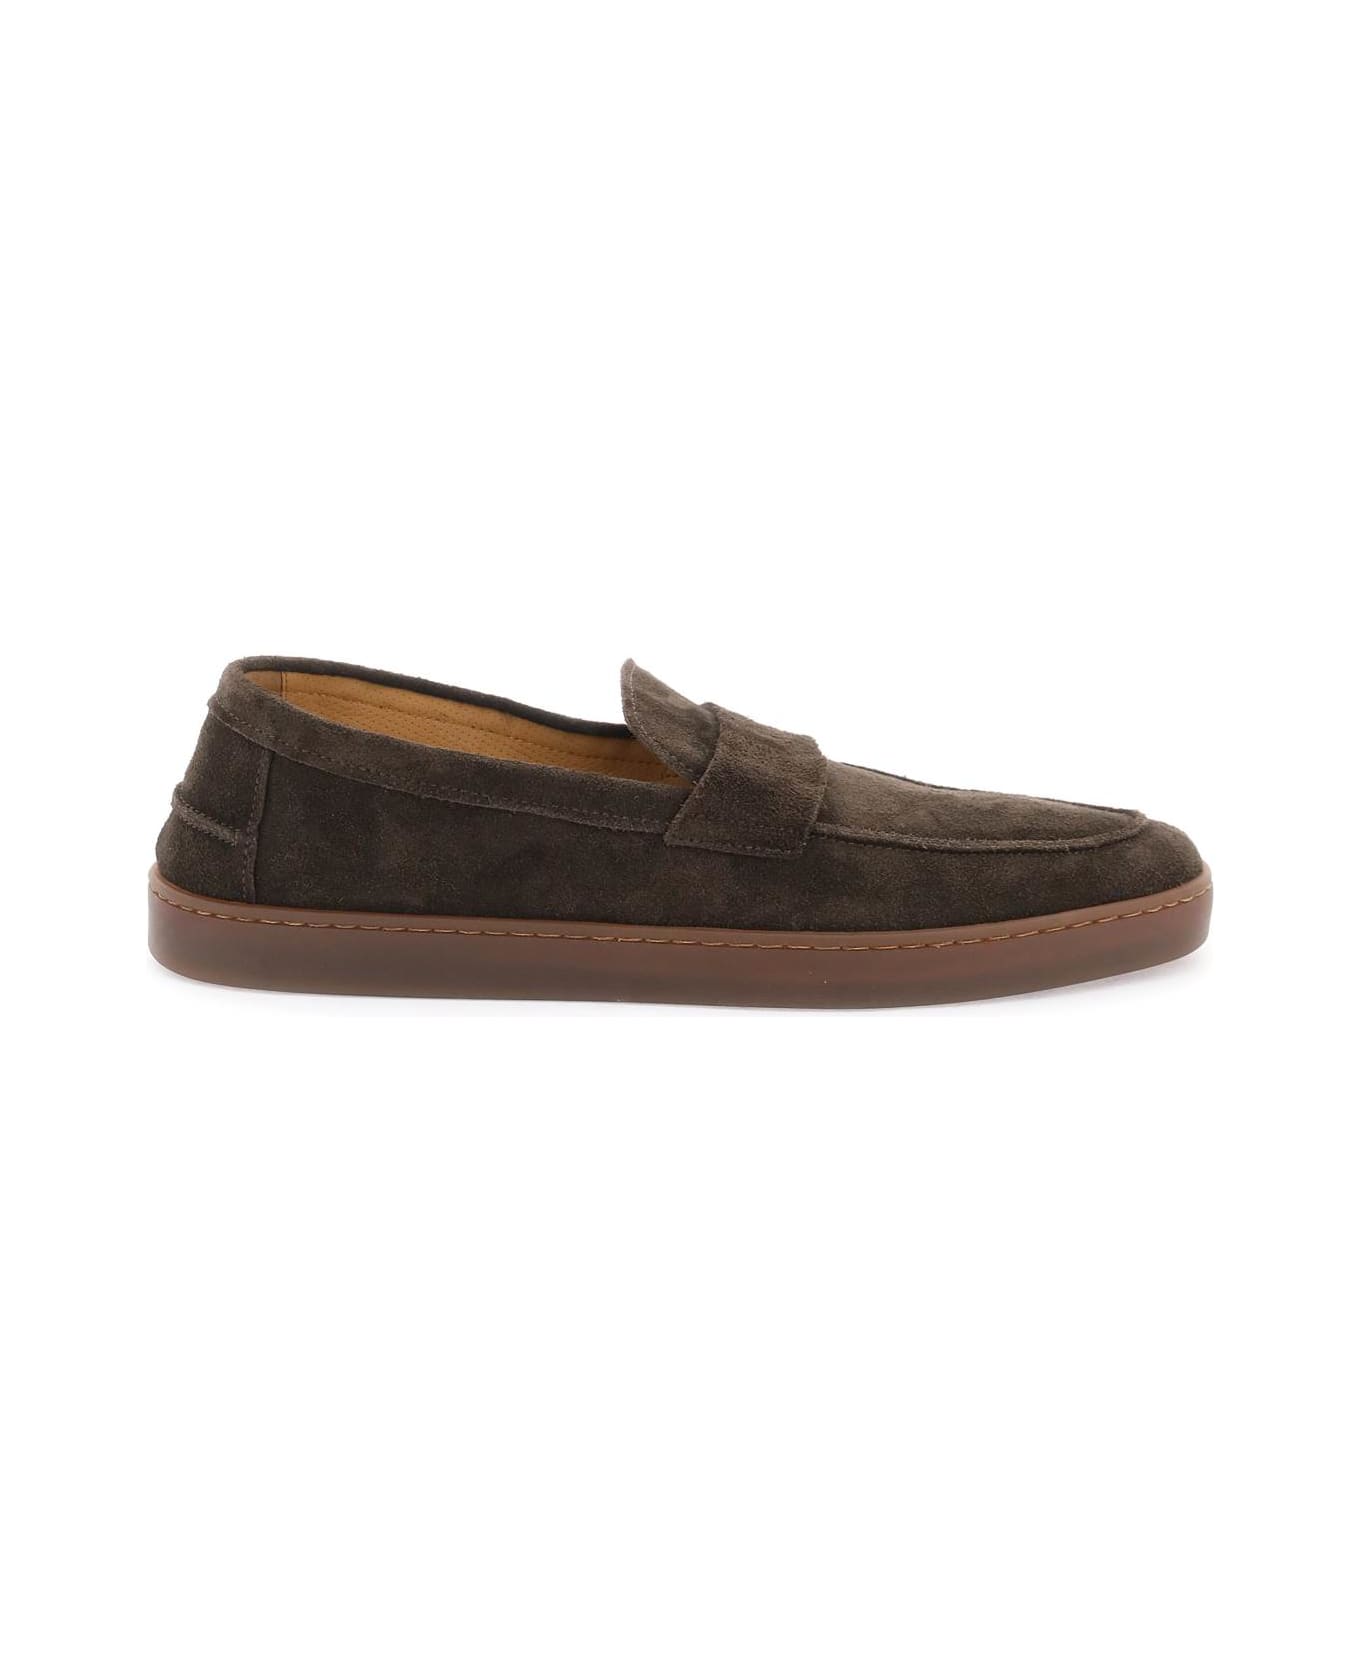 Henderson Baracco Suede Loafers - MODICA CLOUD (Brown)